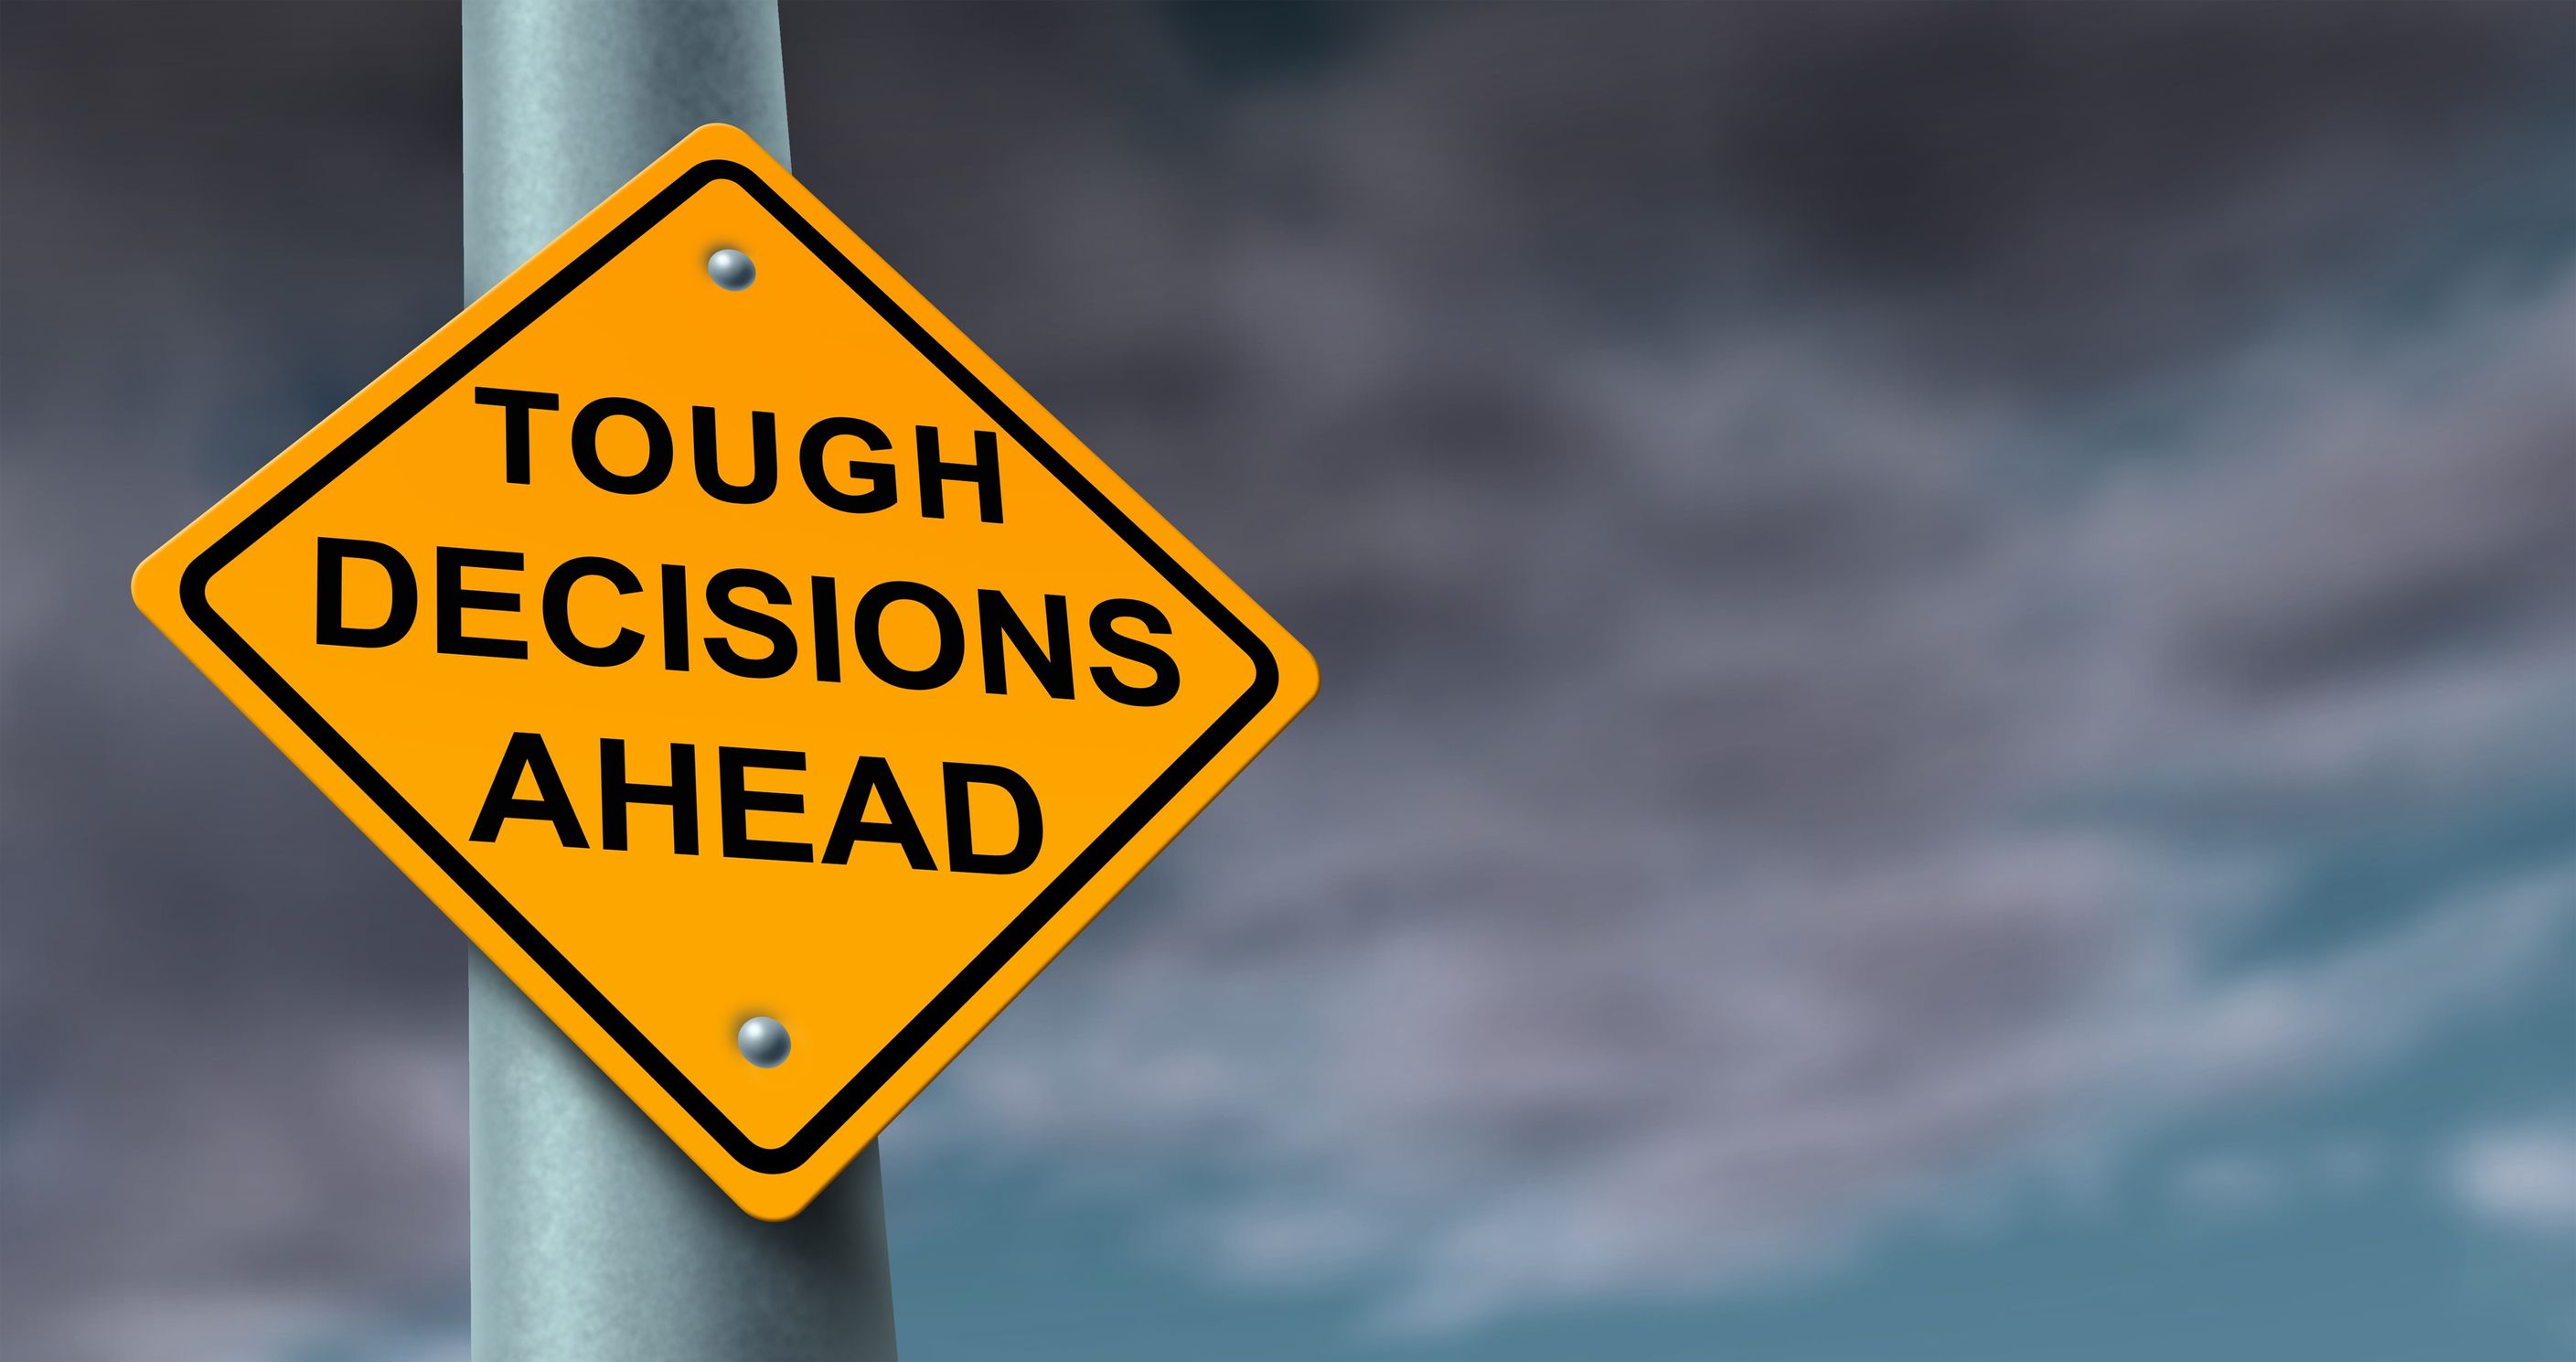 Why Do We Delay Tough Decisions?